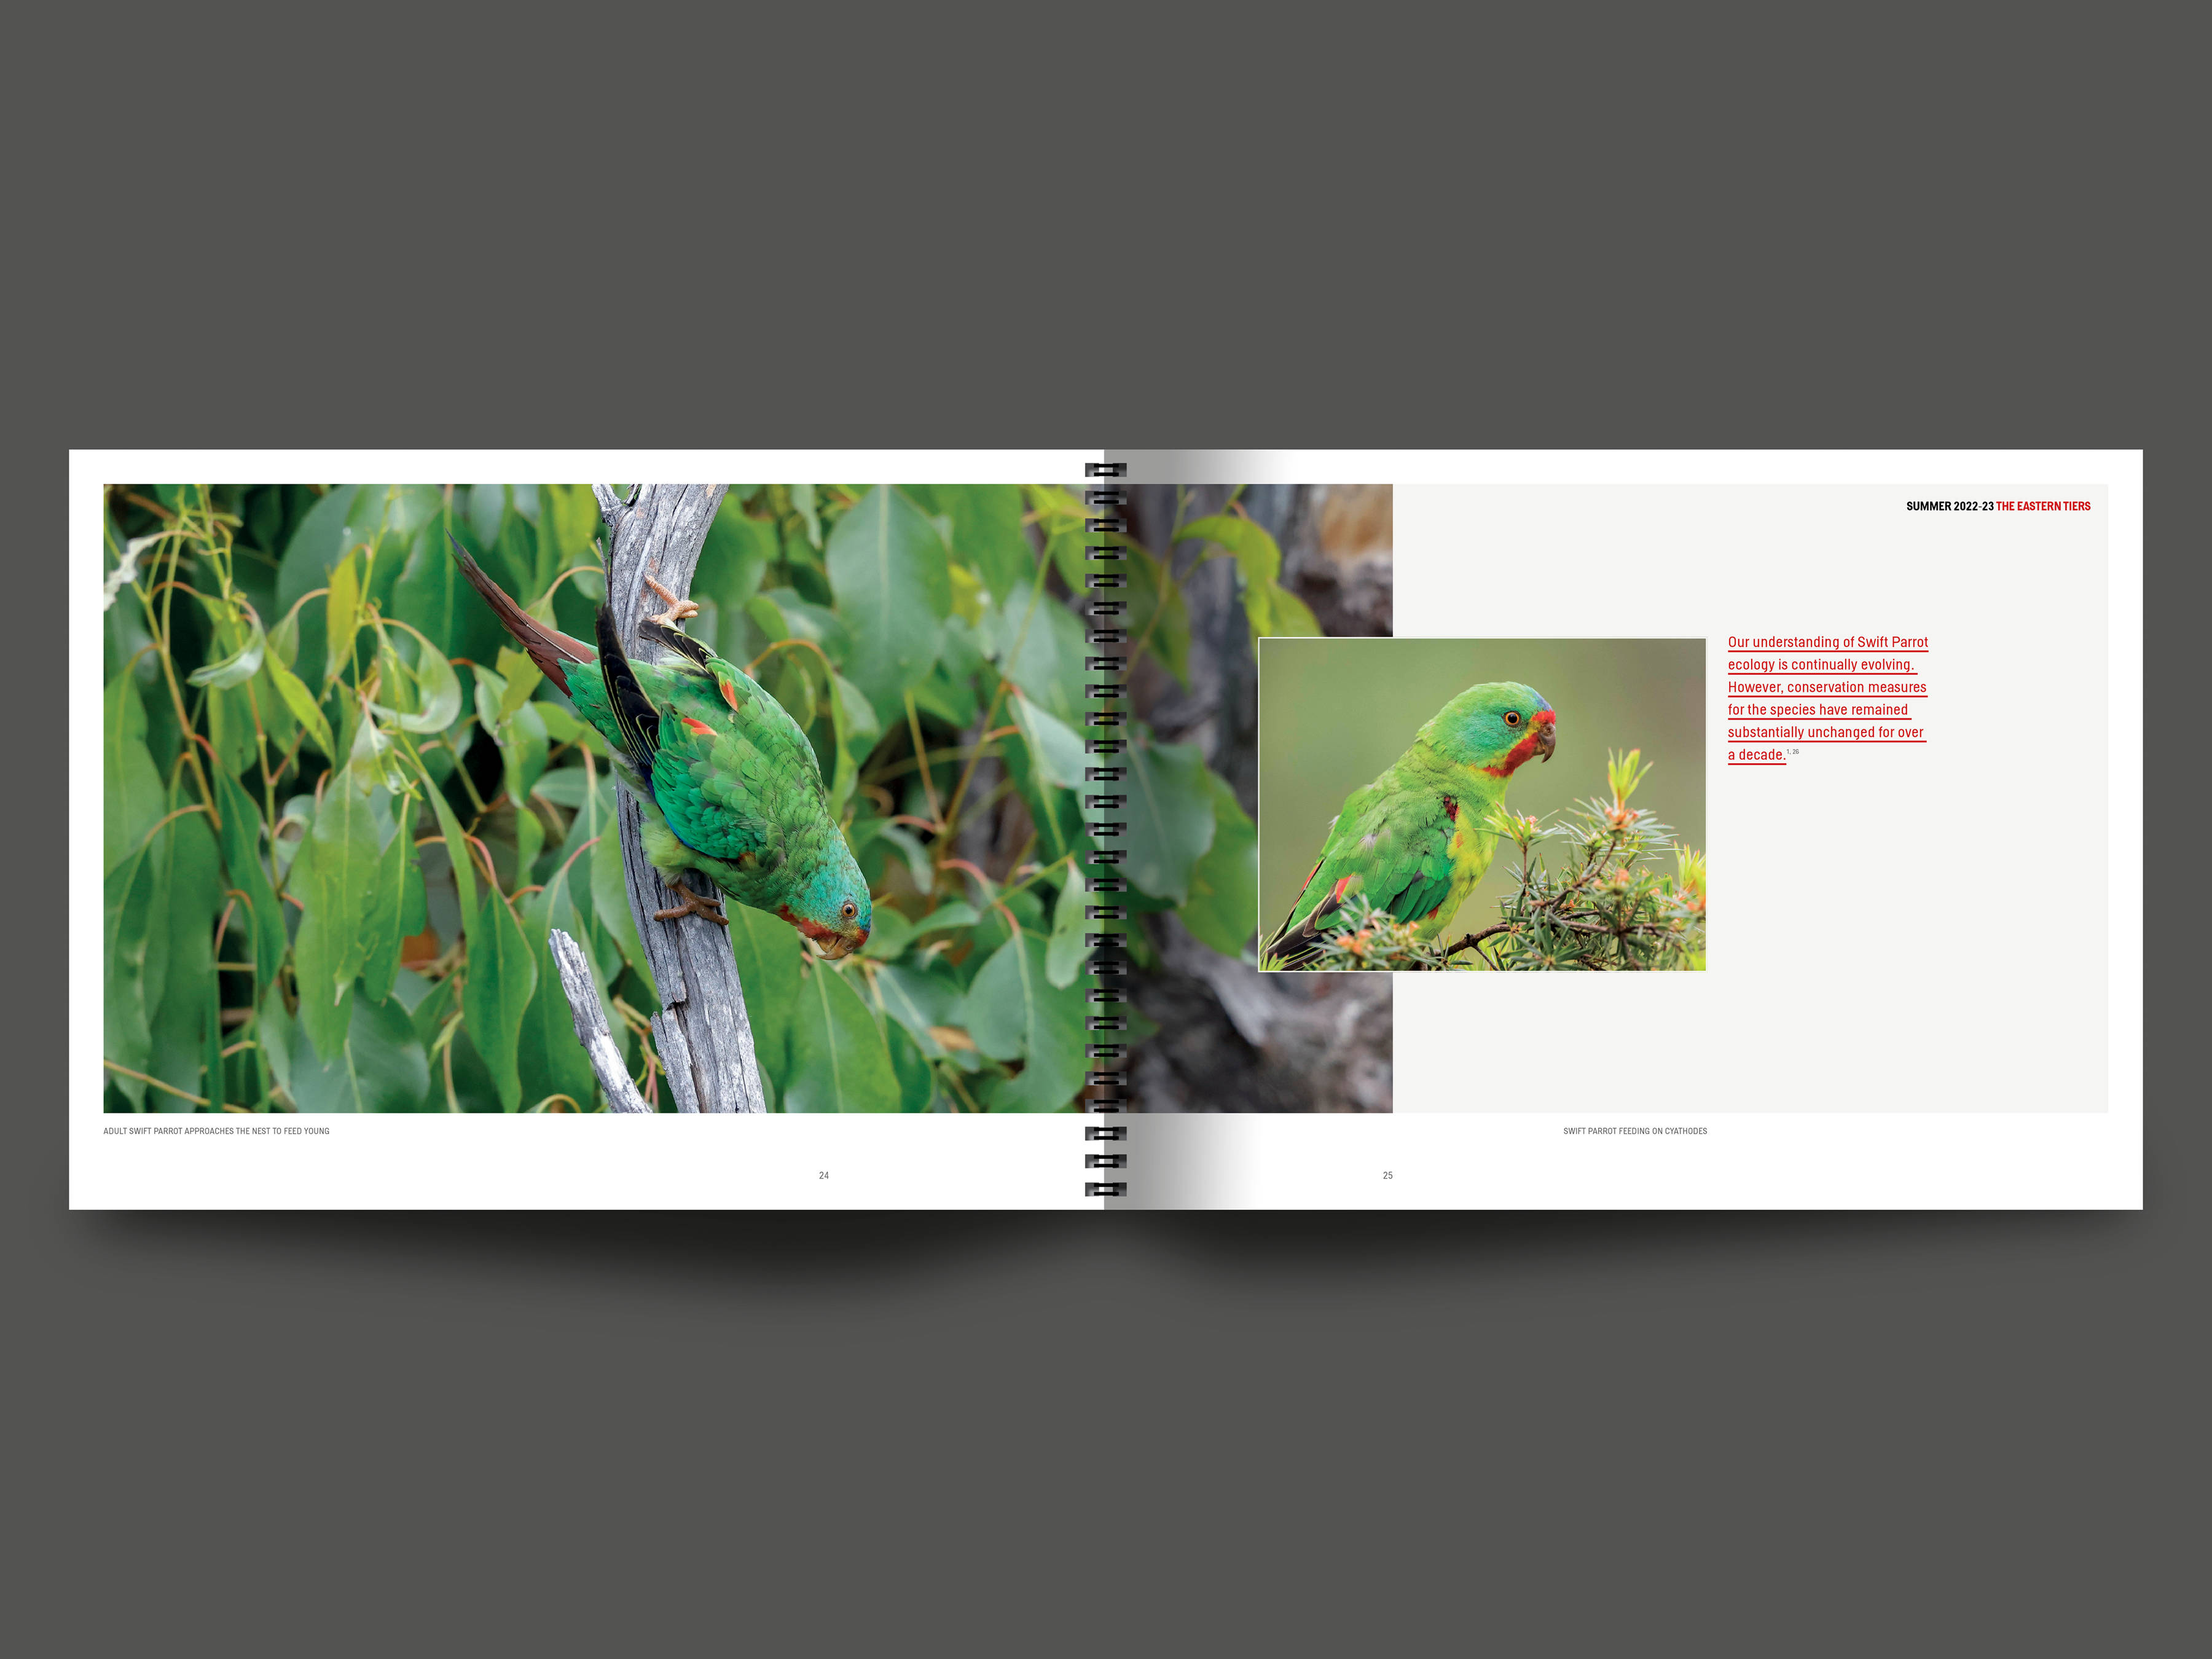 A double page spread from the book featuring a full page photograph of the Swift Parrot on the left and a smaller inset image of a Swift Parrot feeding on Cyathodes on the right. Images by Rob Blakers.